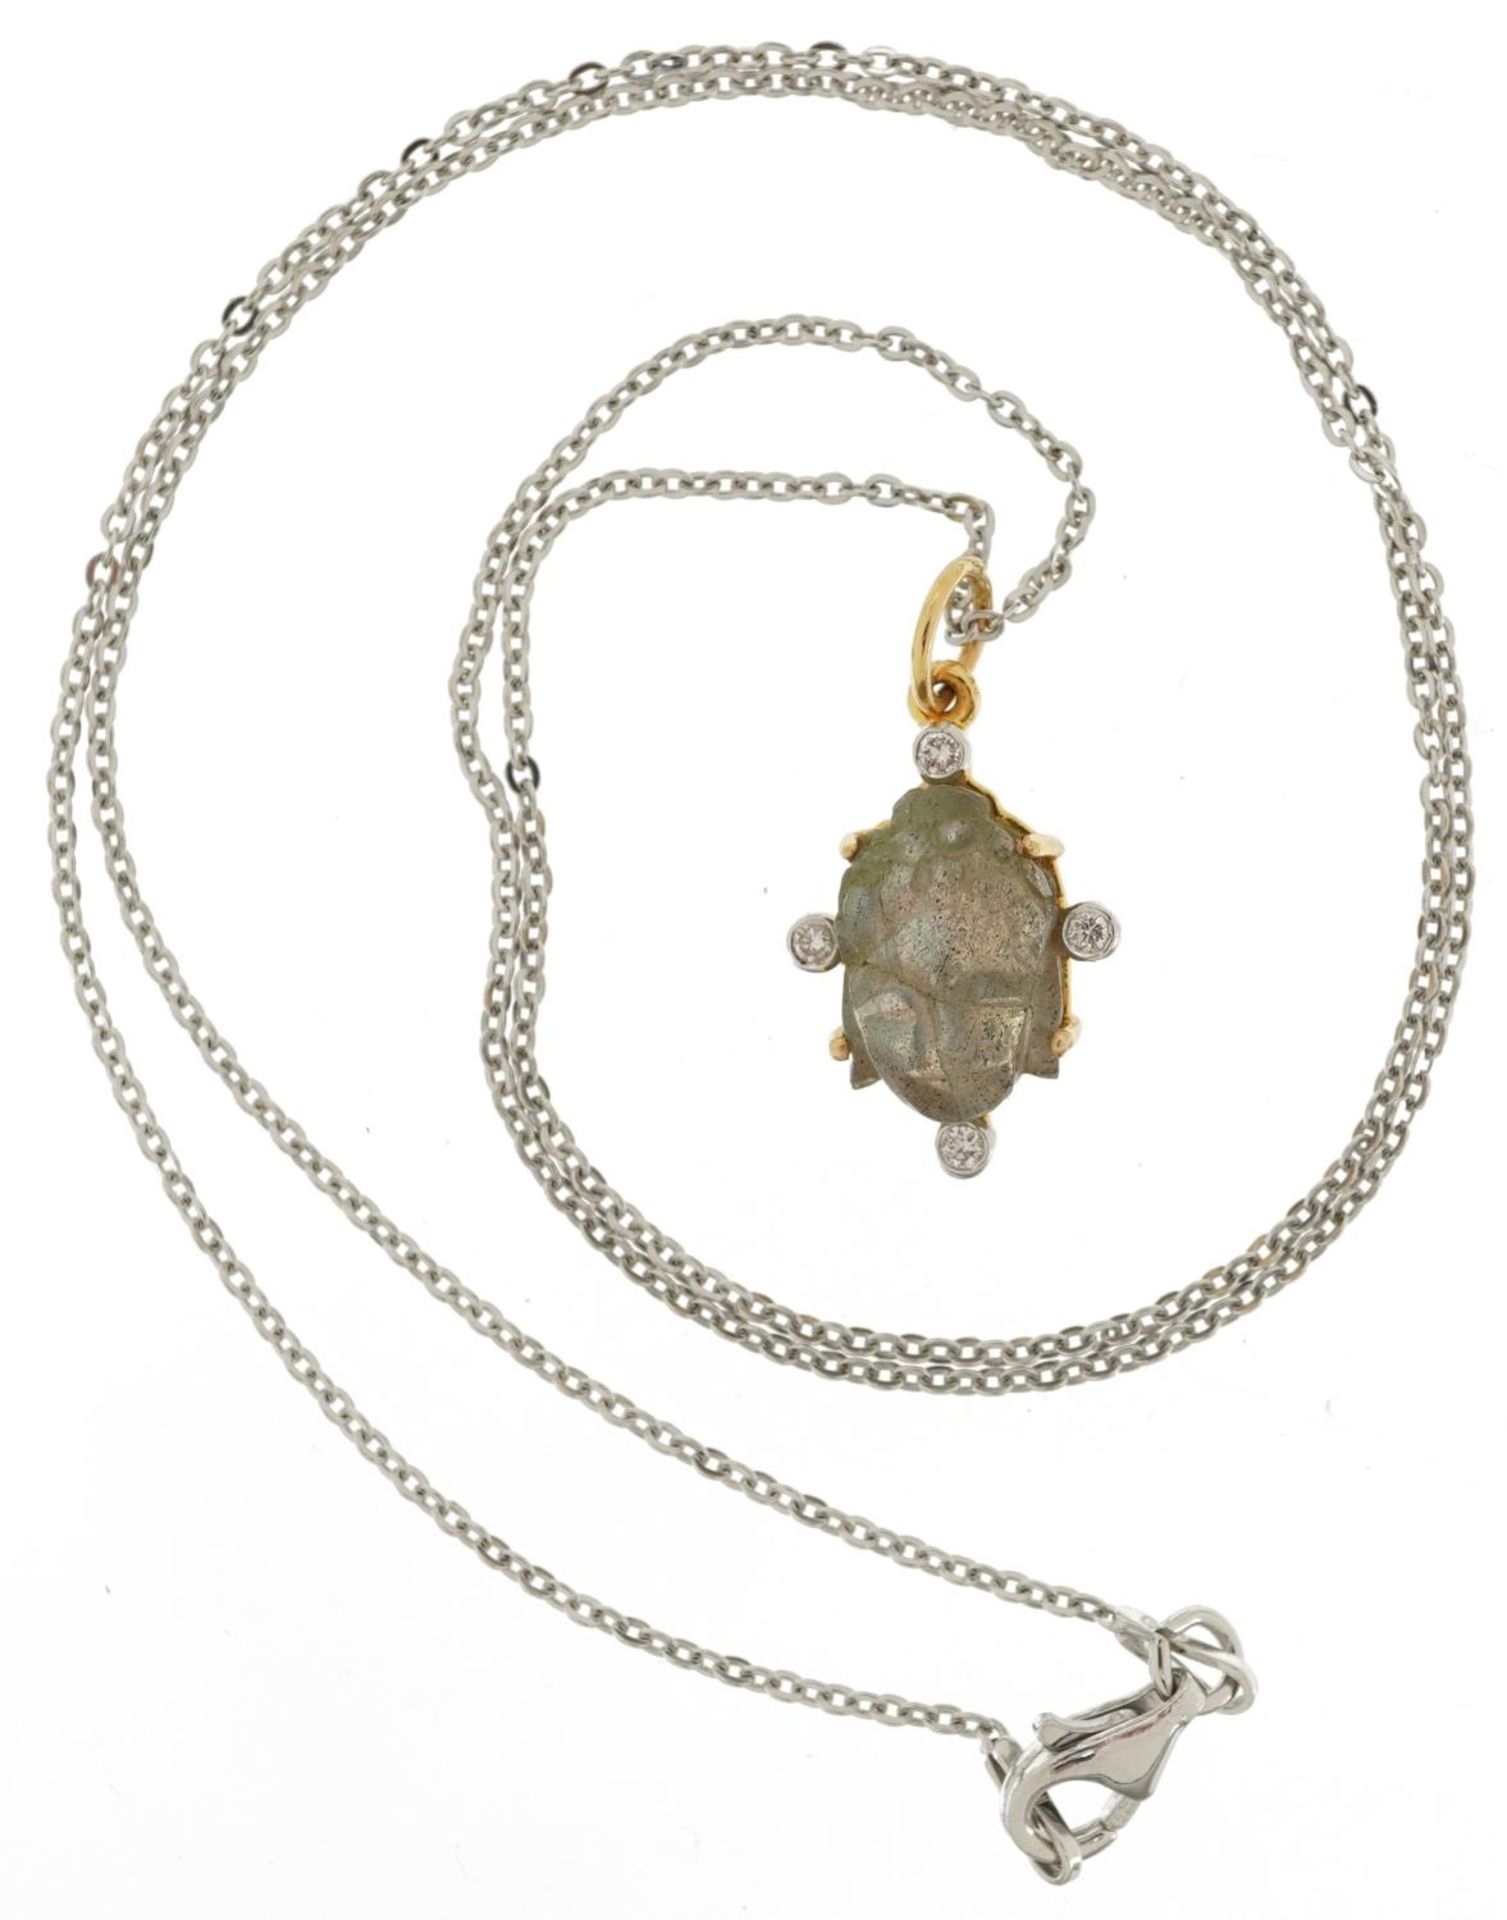 14ct gold diamond and carved labradorite pendant in the form of a Buddha head, on a silver necklace, - Image 3 of 5